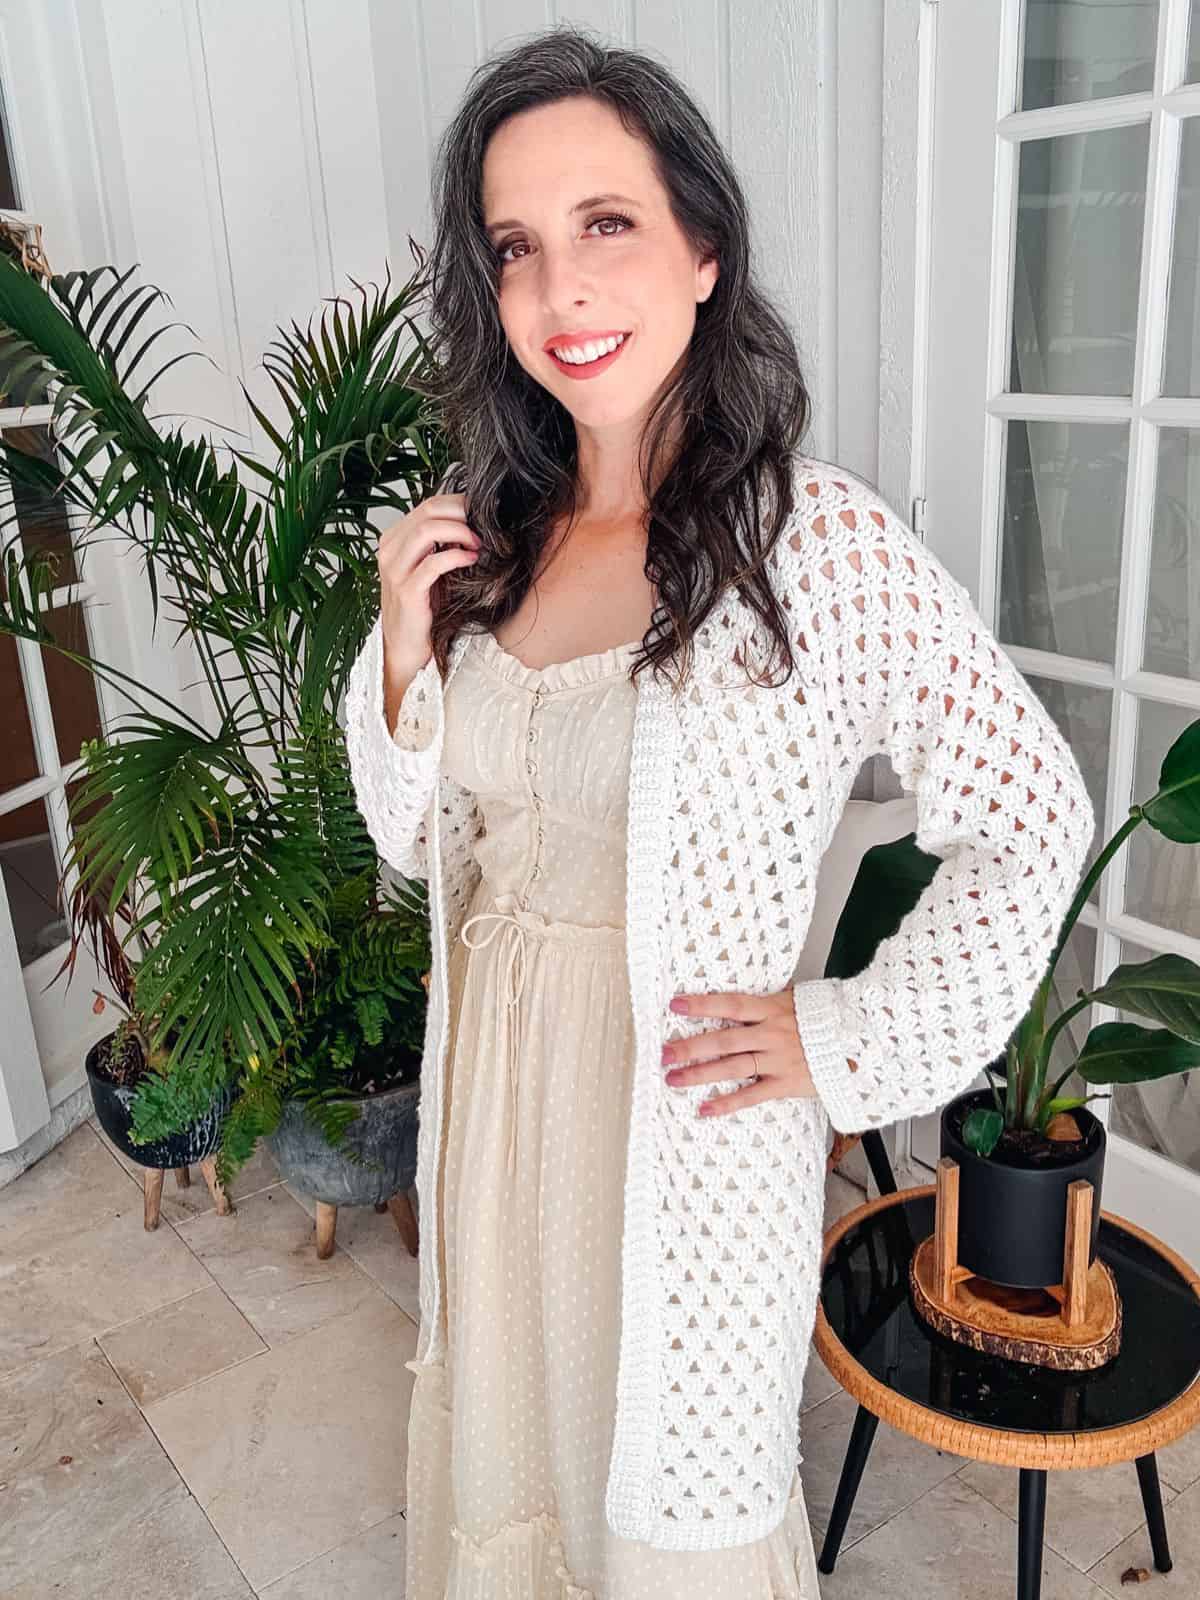 A woman with long dark hair stands indoors next to potted plants, wearing a beige dress and a white crocheted cardigan, smiling at the camera.